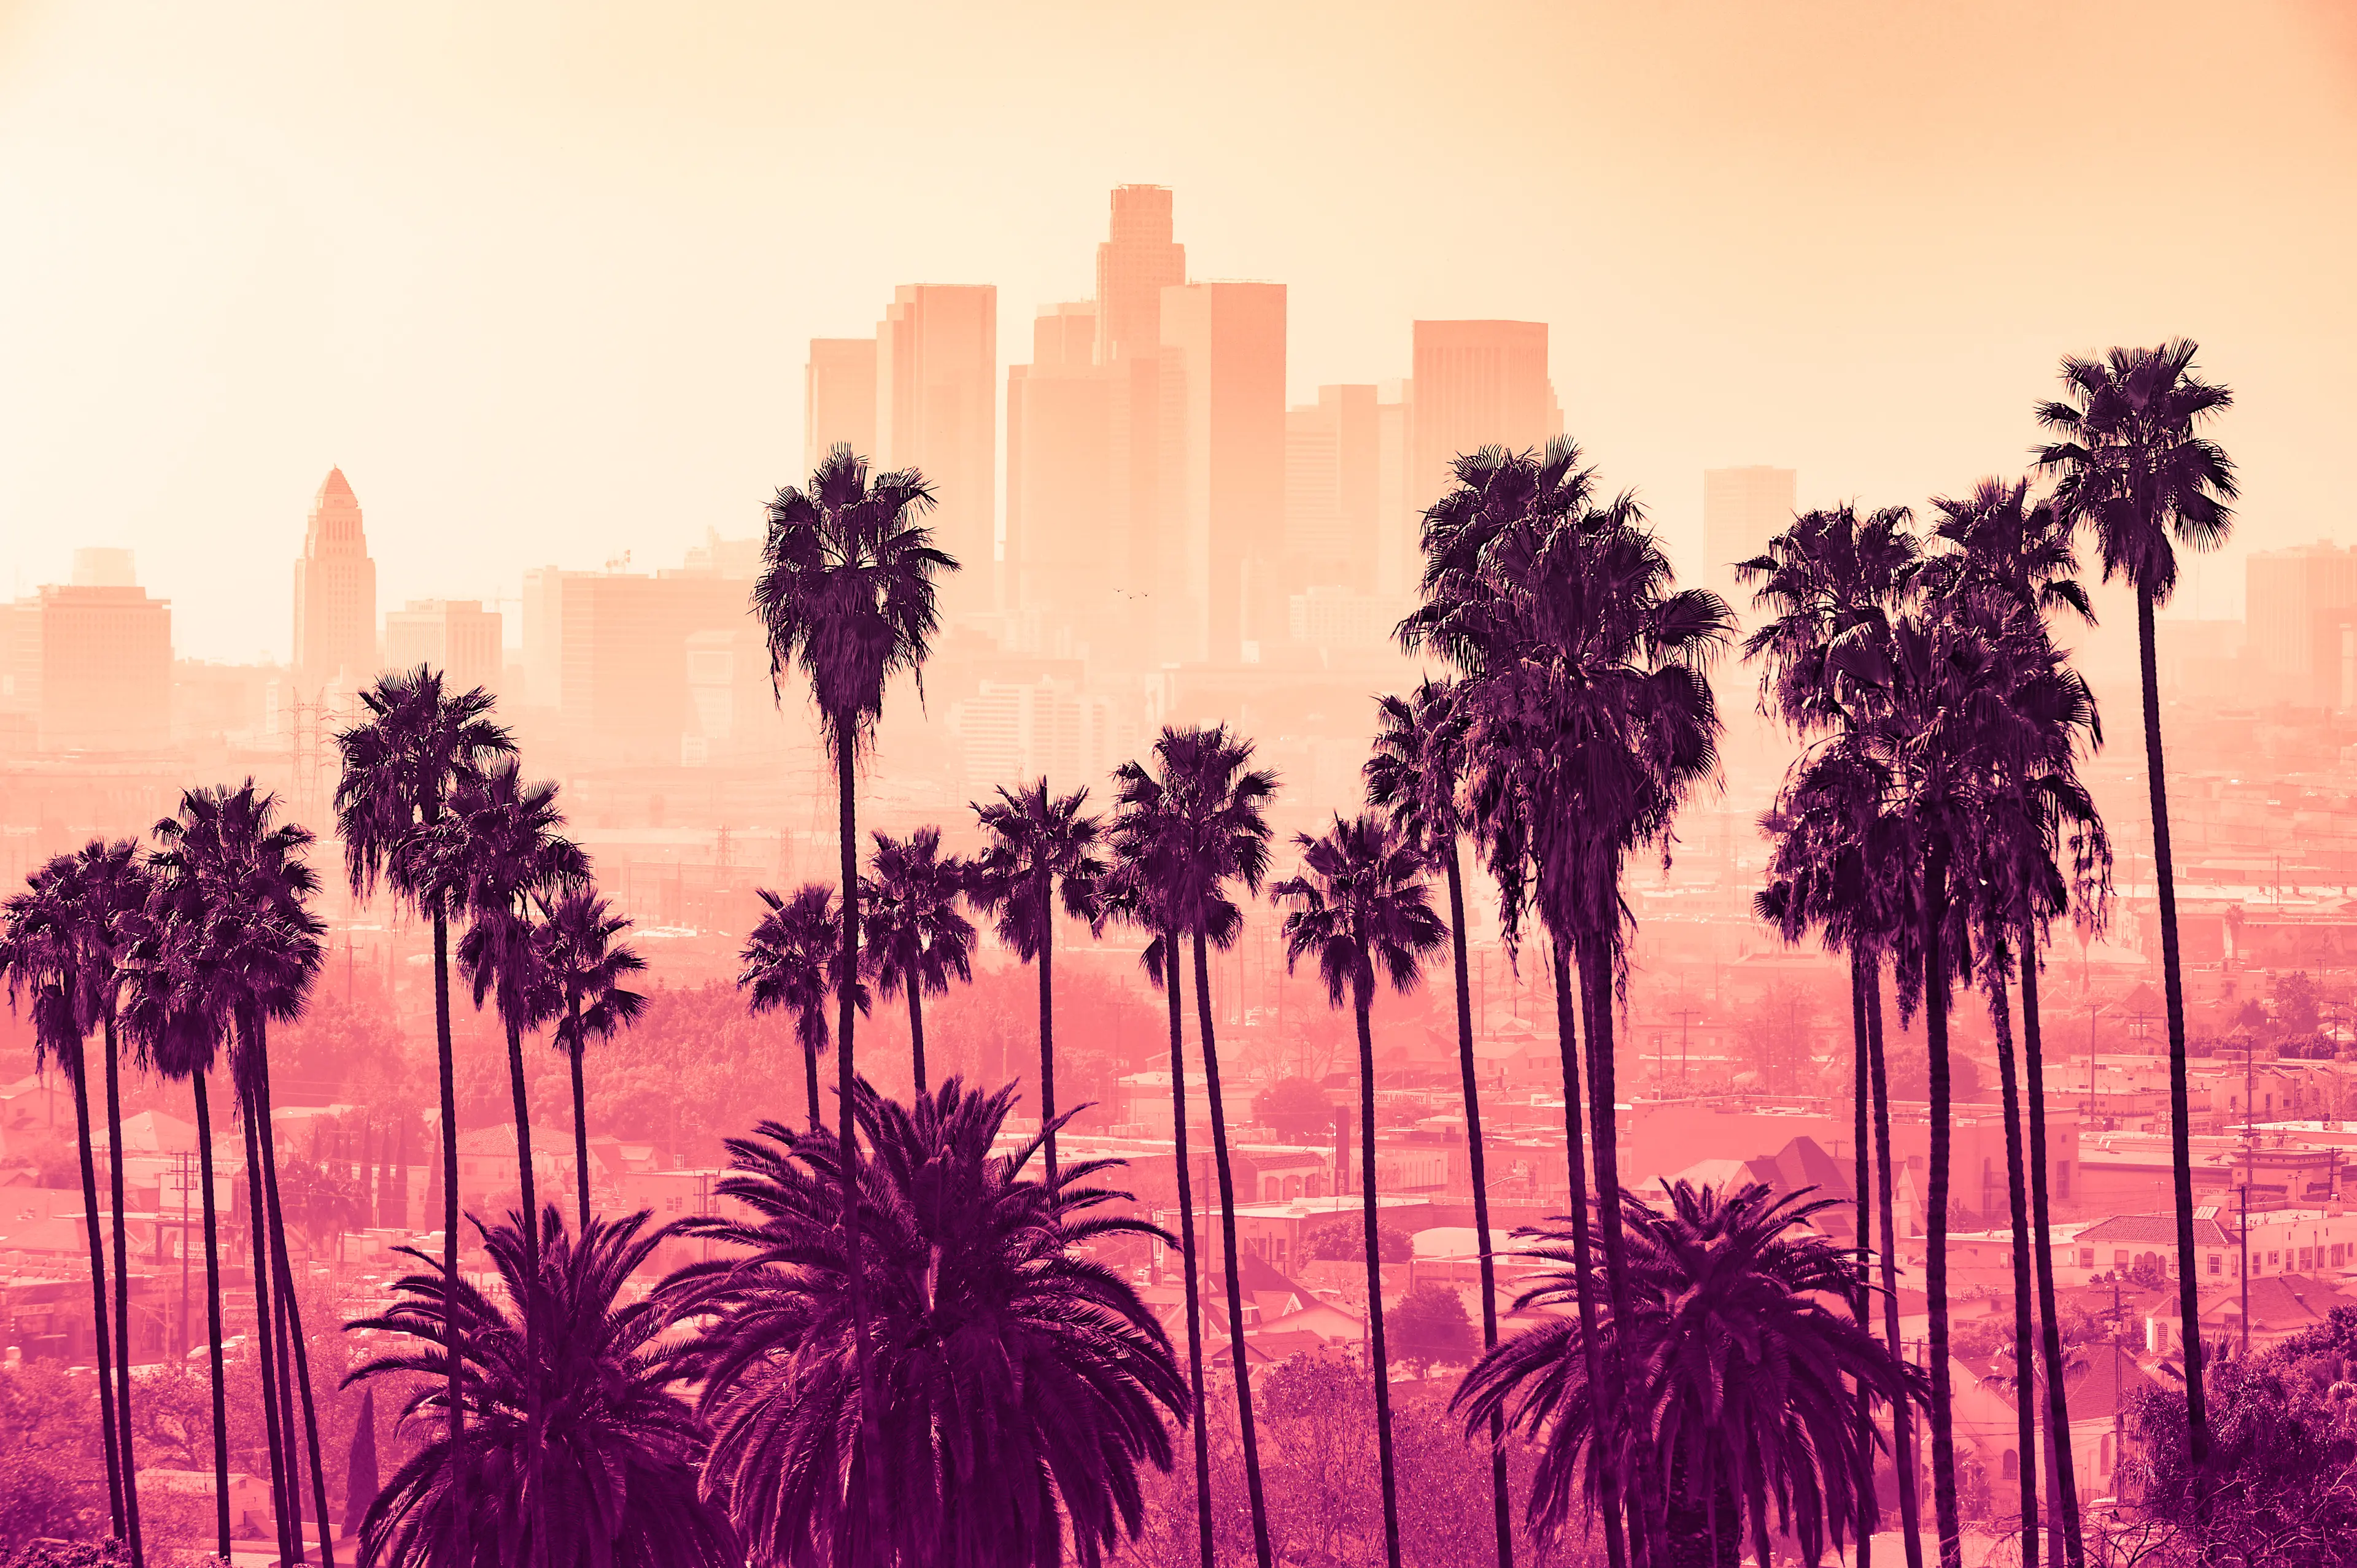 2-Day LA Adventure: Outdoor Excitement & Vibrant Nightlife with Friends